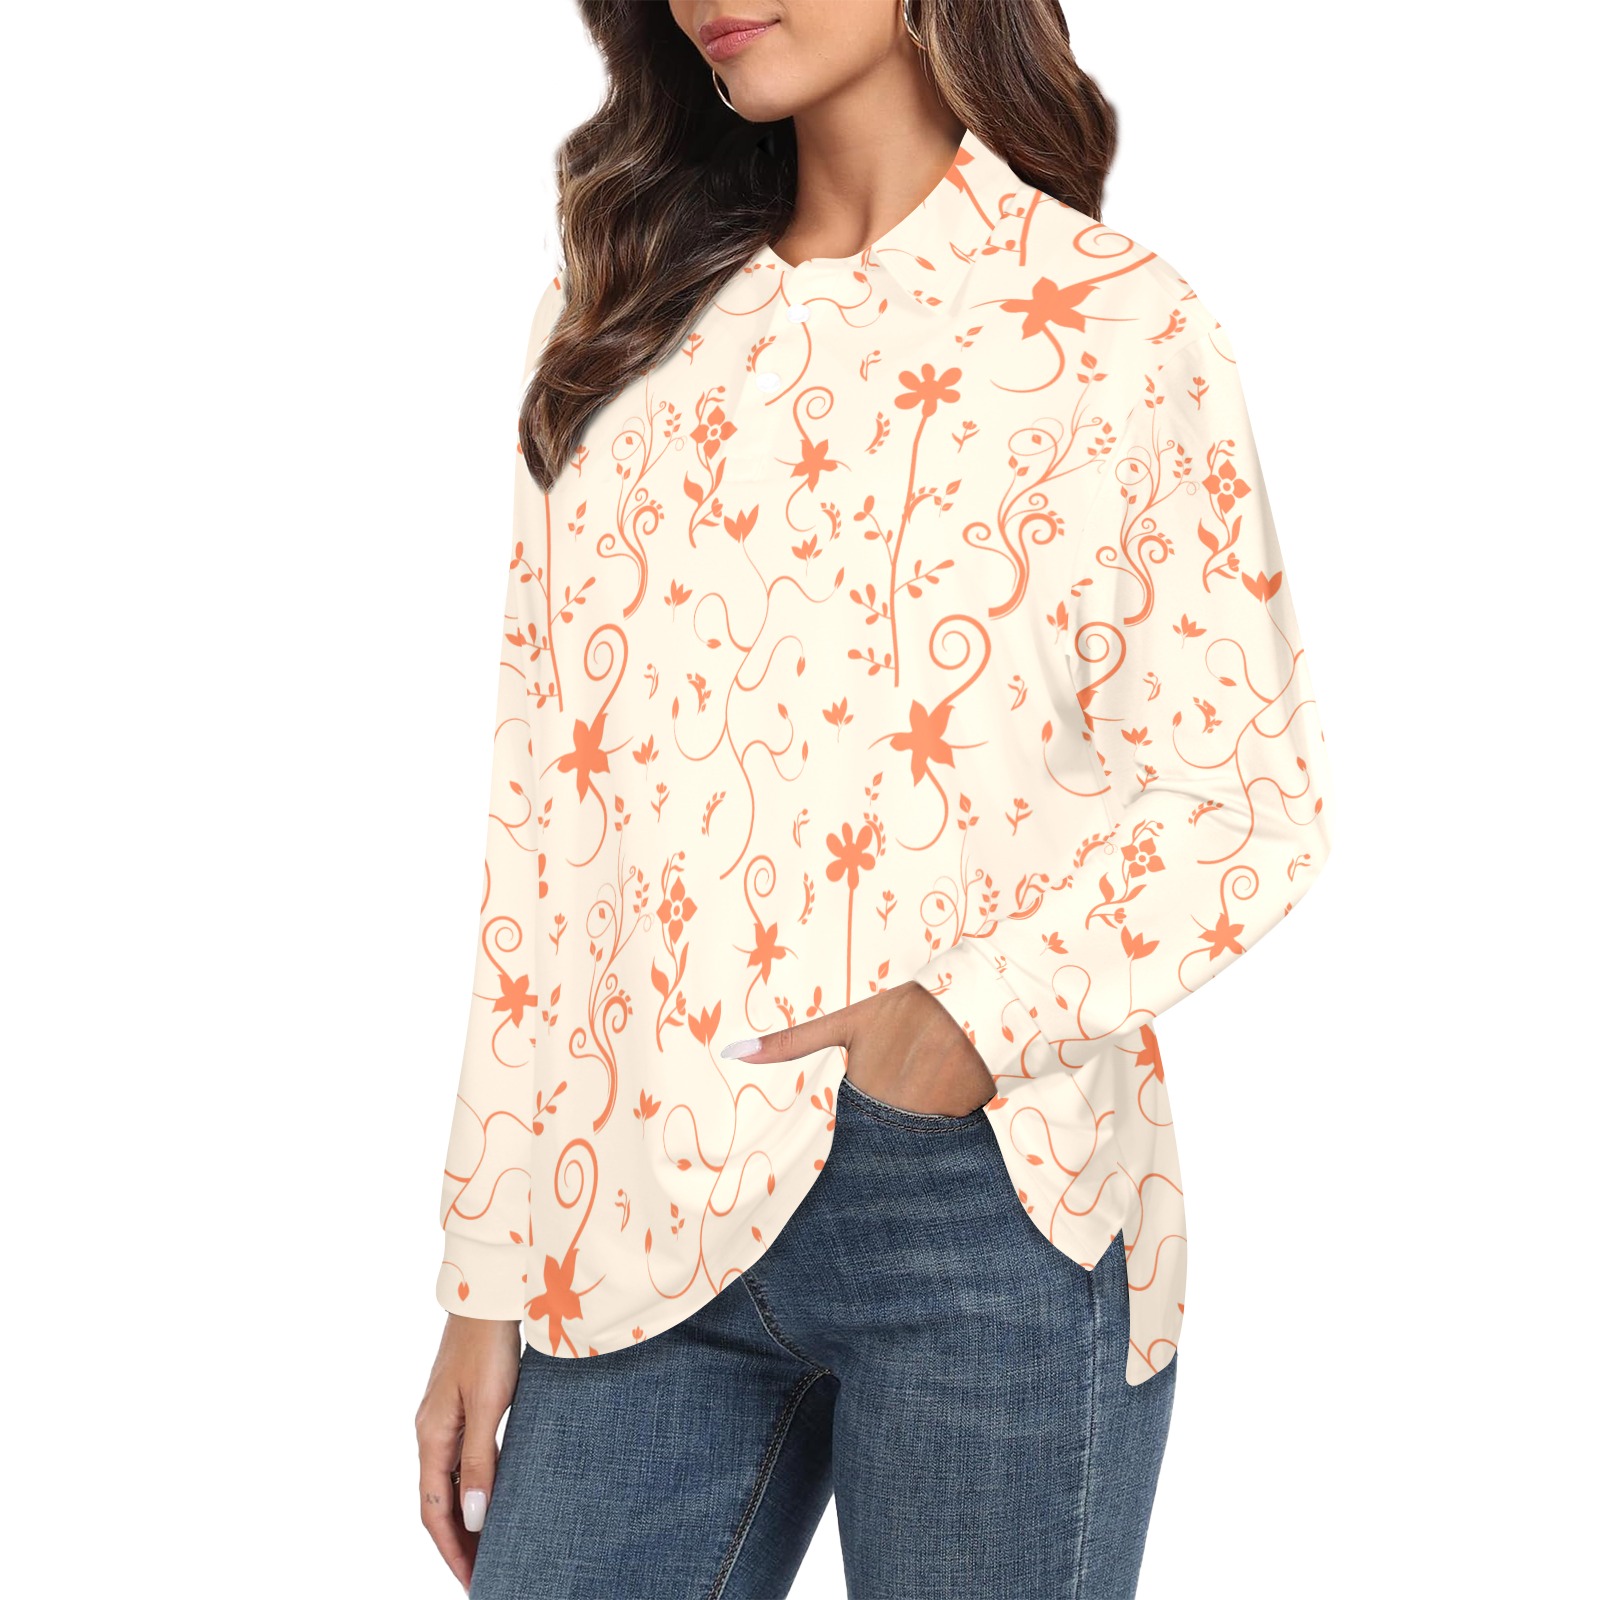 Living Coral Floral Pattern Women's Long Sleeve Polo Shirt (Model T73)